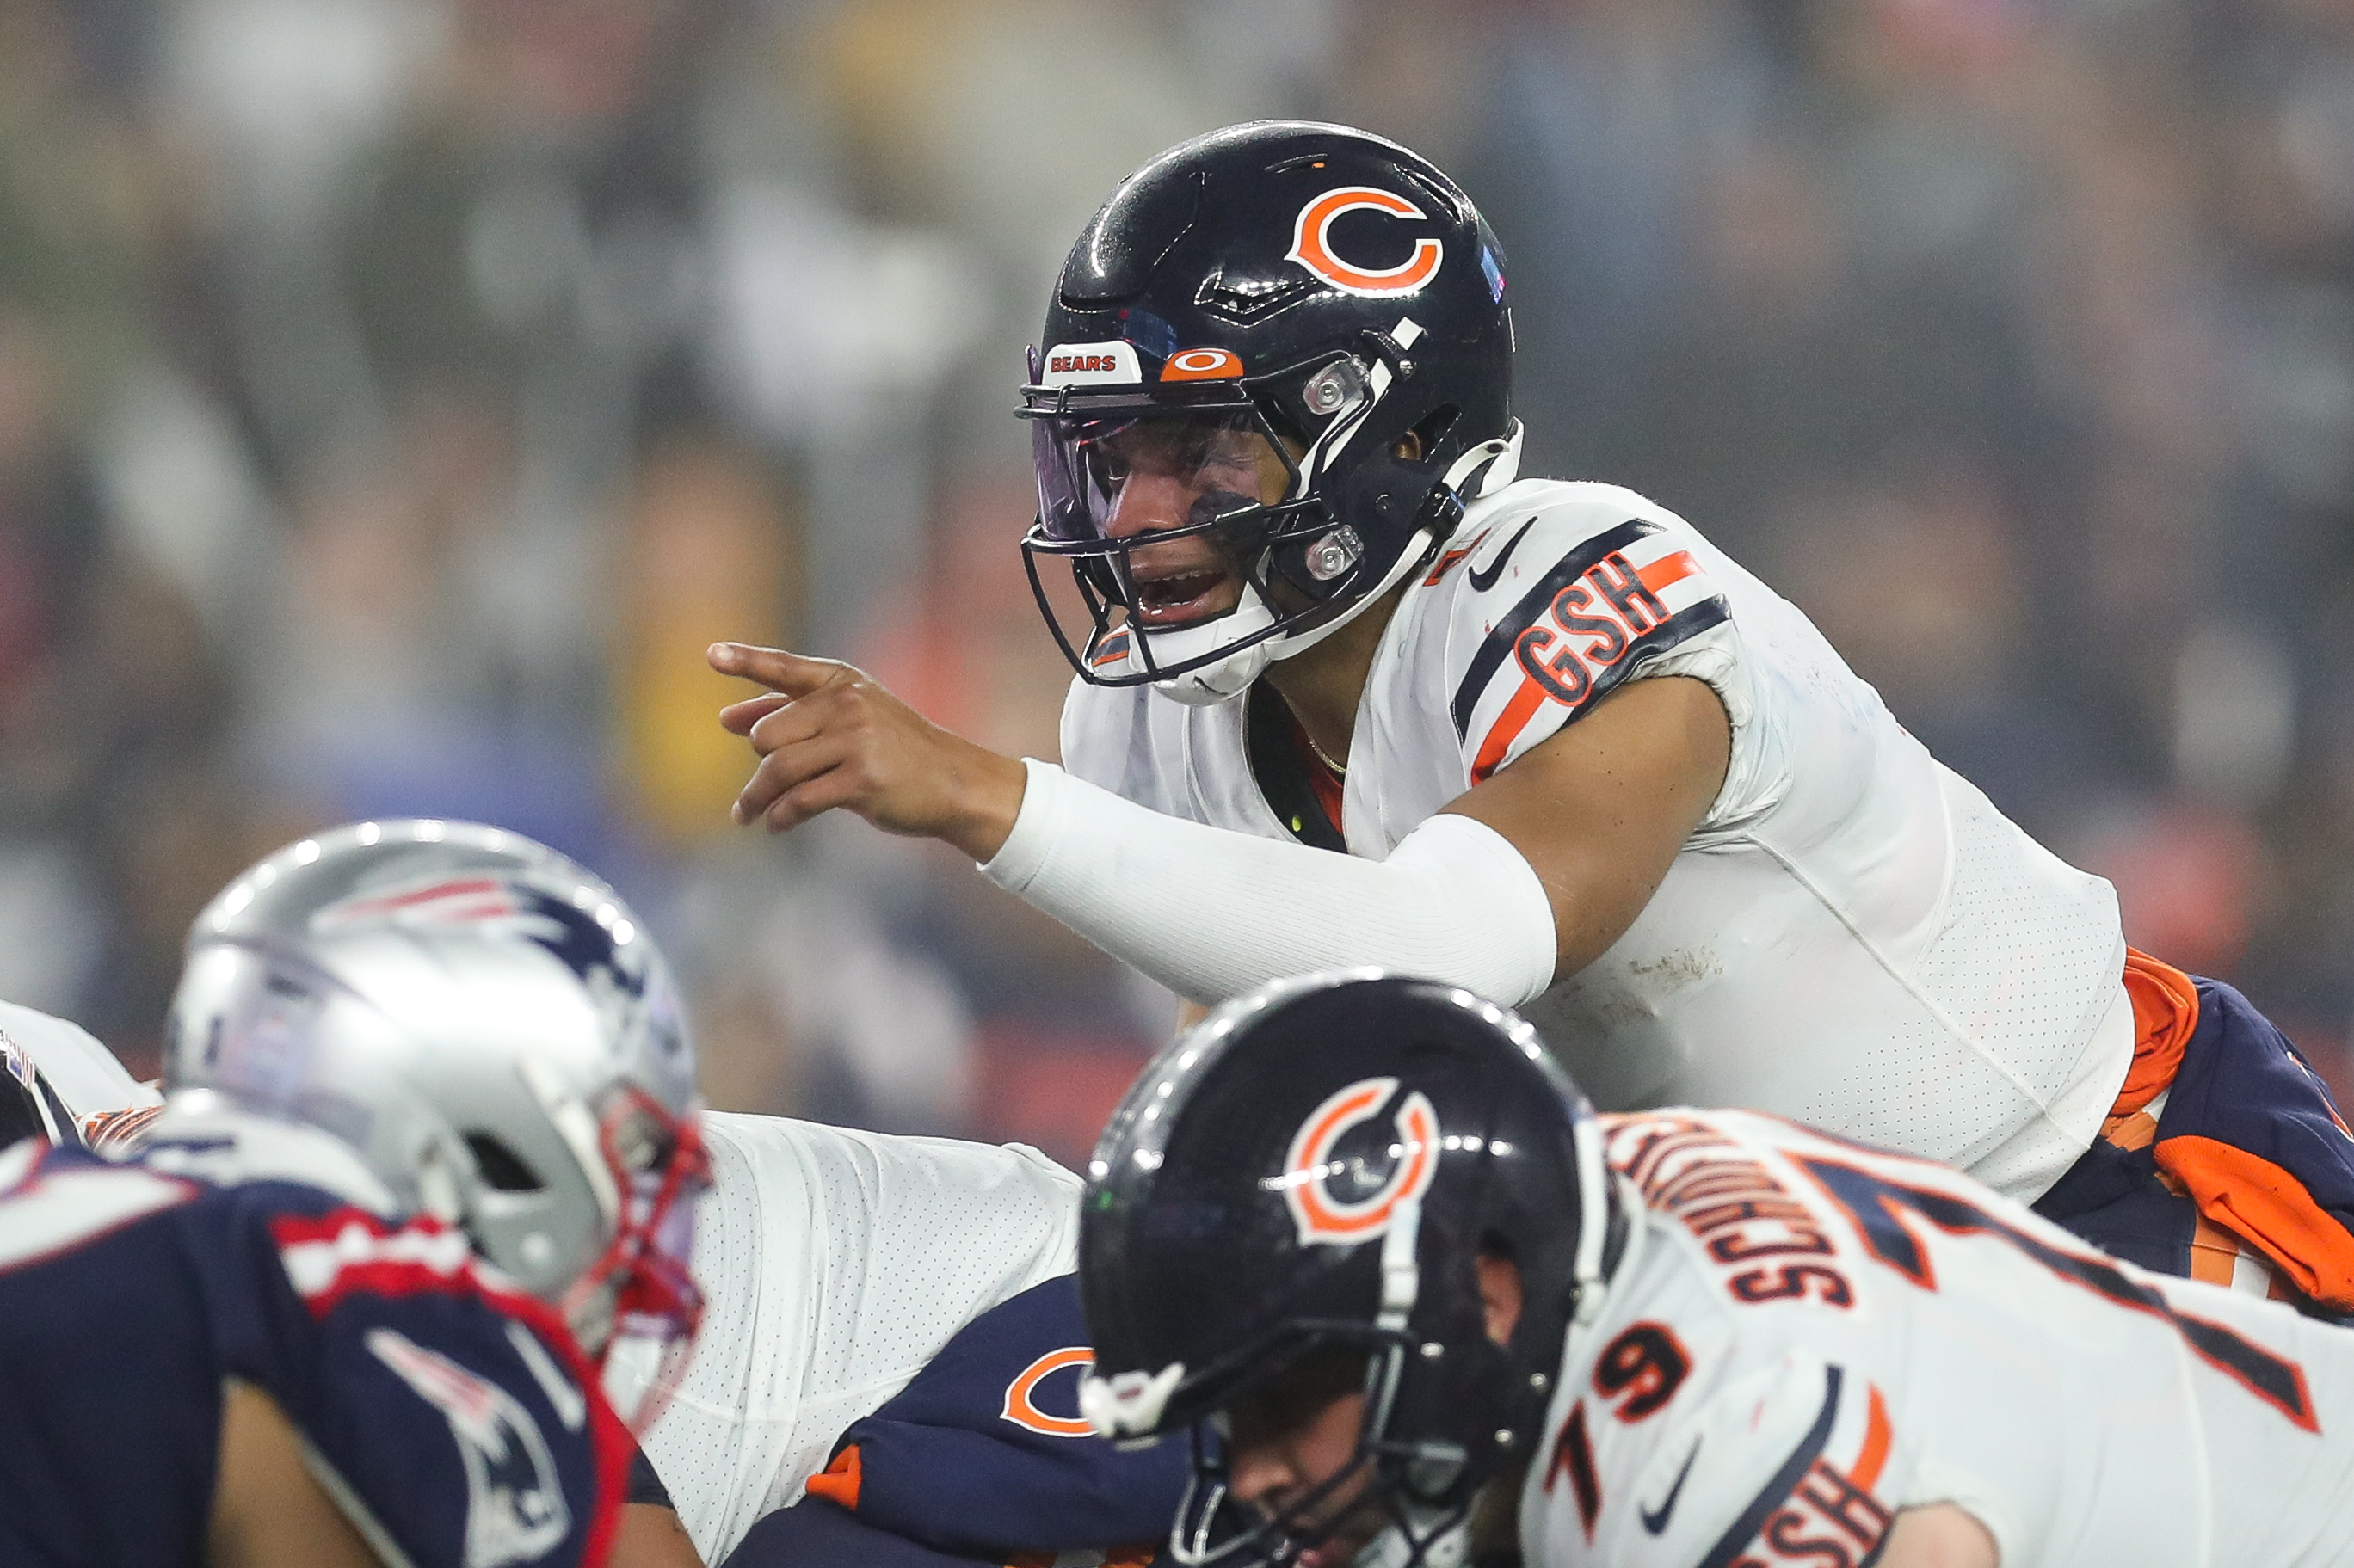 NFL: Chicago Bears at New England Patriots